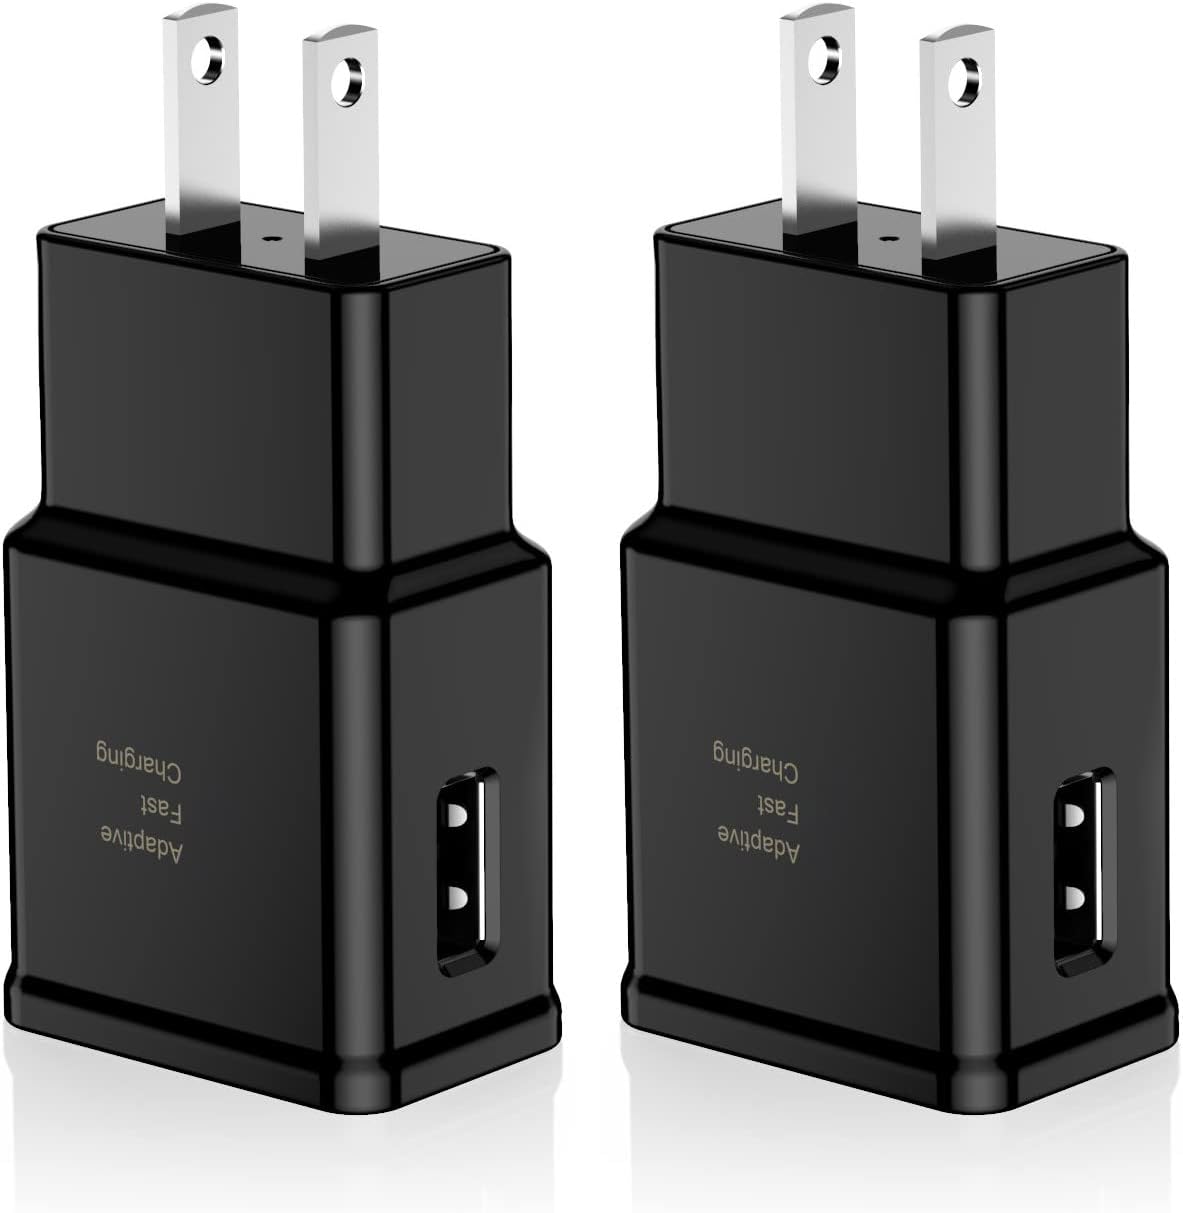 A2 S9 S8 Plus,S7 G6 11 Pro 7 Plus X S9 Plus Note 8 Xiaomi Mi A1 UGREEN USB Wall Charger 18W Quick Charge 3.0 Fast Charger Compatible for Samsung Galaxy Note 9 8 G5 G7 S7 Edge 11 Pro Max LG V30 8 Plus 7 iPad Galaxy S8 iPhone 11